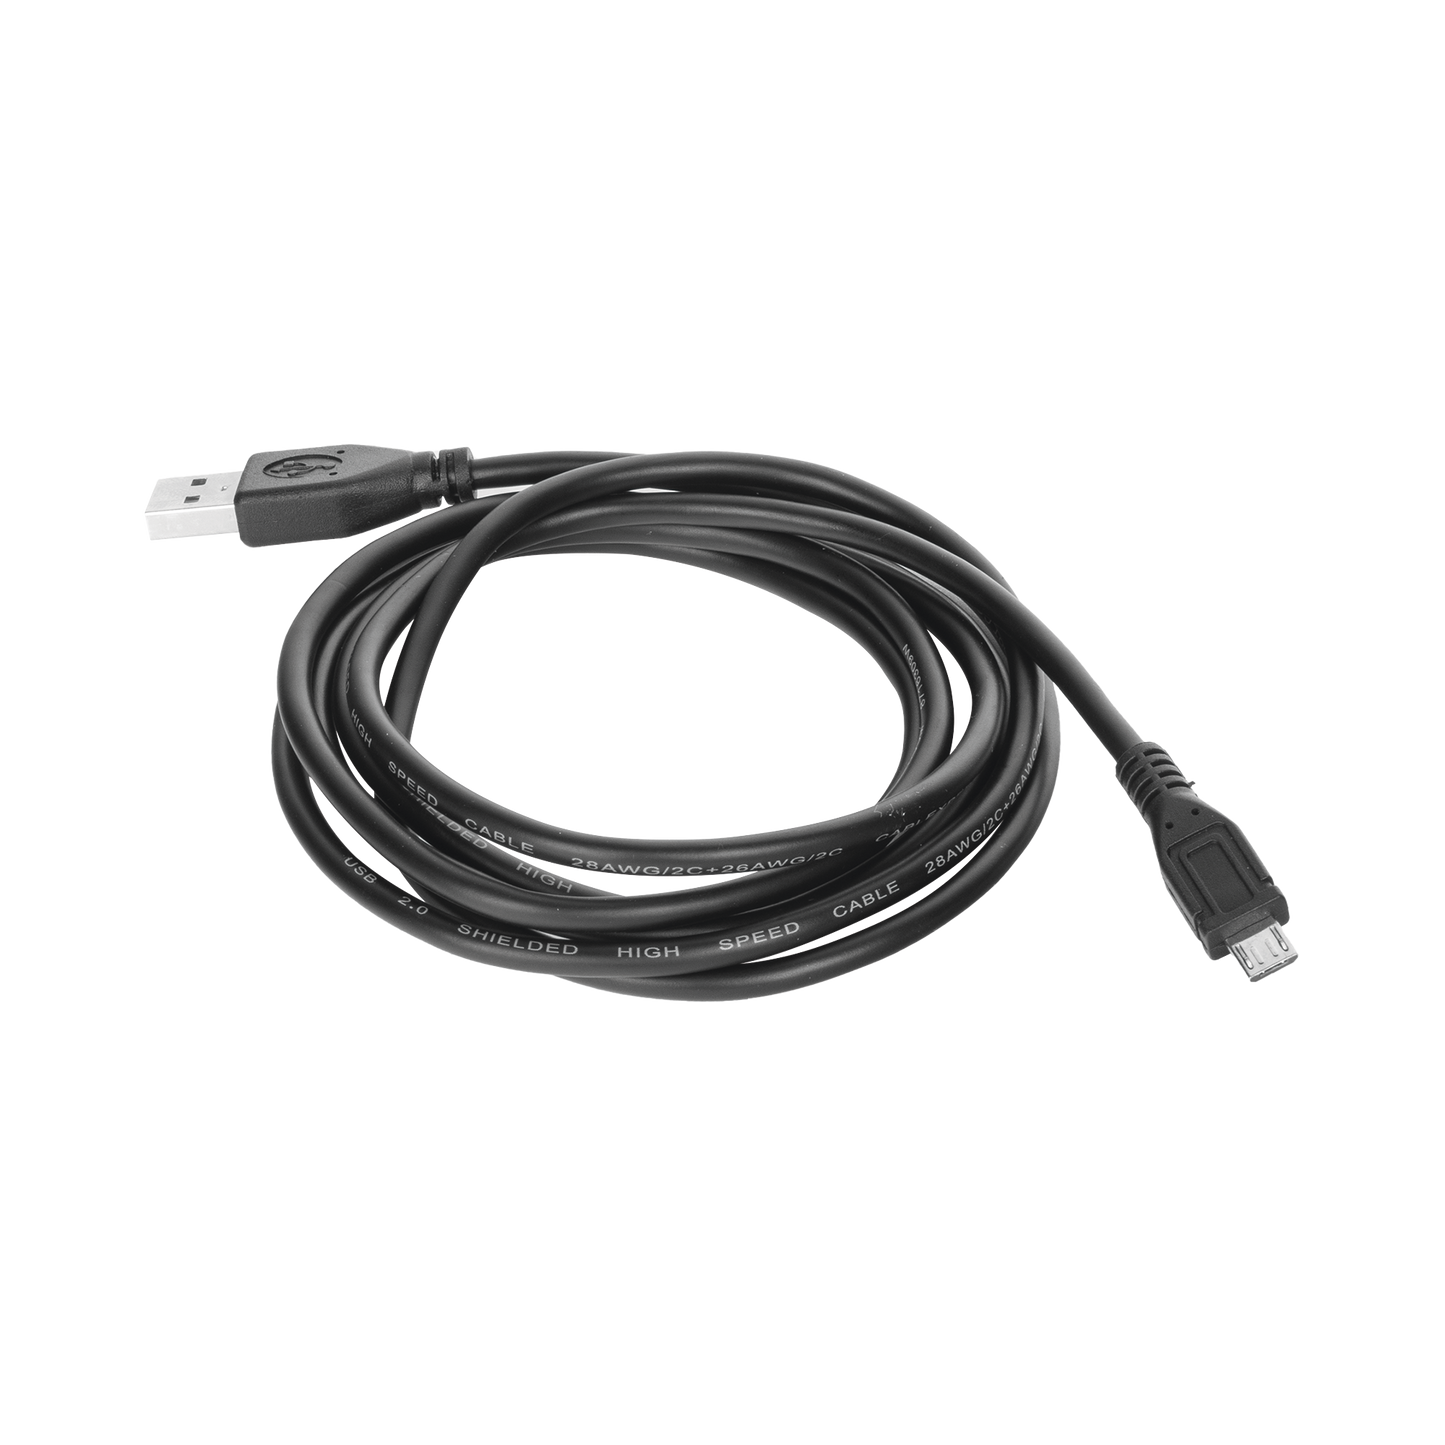 Programming Cable for TCO4 & Eco4light Trackers